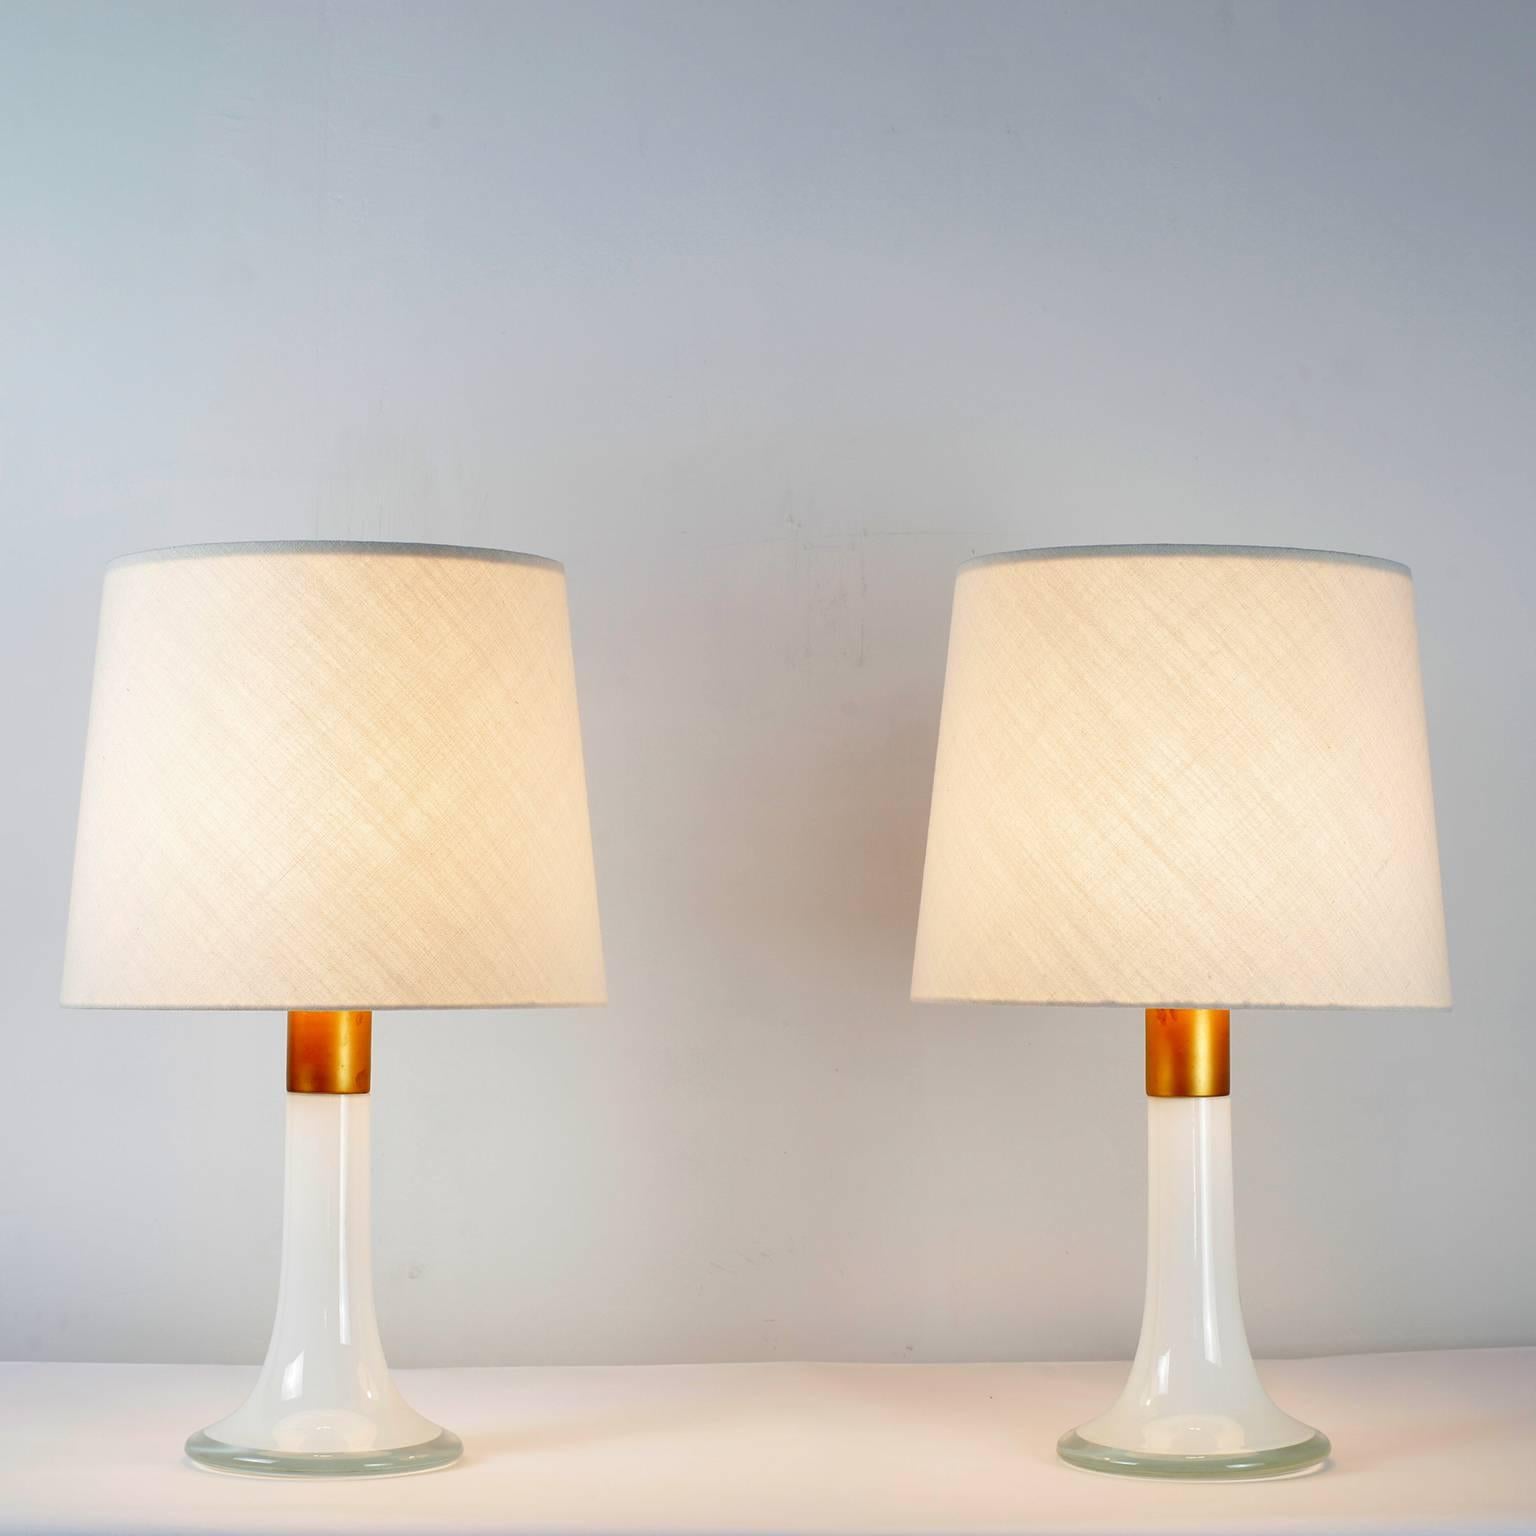 Rare pair of Lisa Johansson-Pape table lamps model 46-017 
White glass and brass details
Ornö Edition 1961 Finland
New lampshades identical to the originals
Height with shades 64 cm - Height without shade 37 cm

Bibliography:
Listed in the catalog